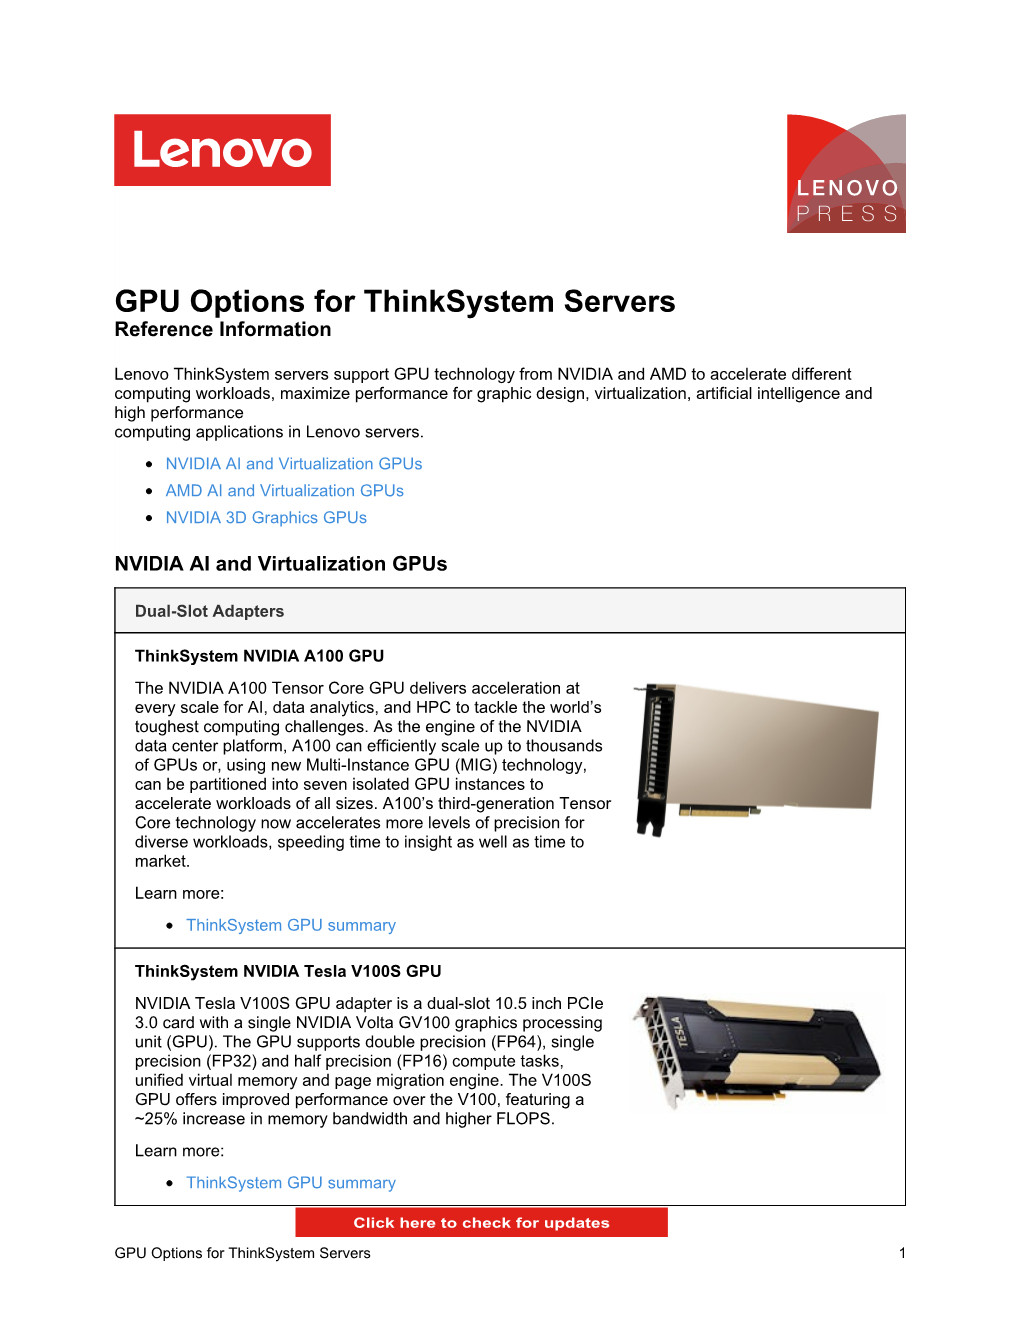 GPU Options for Thinksystem Servers Reference Information